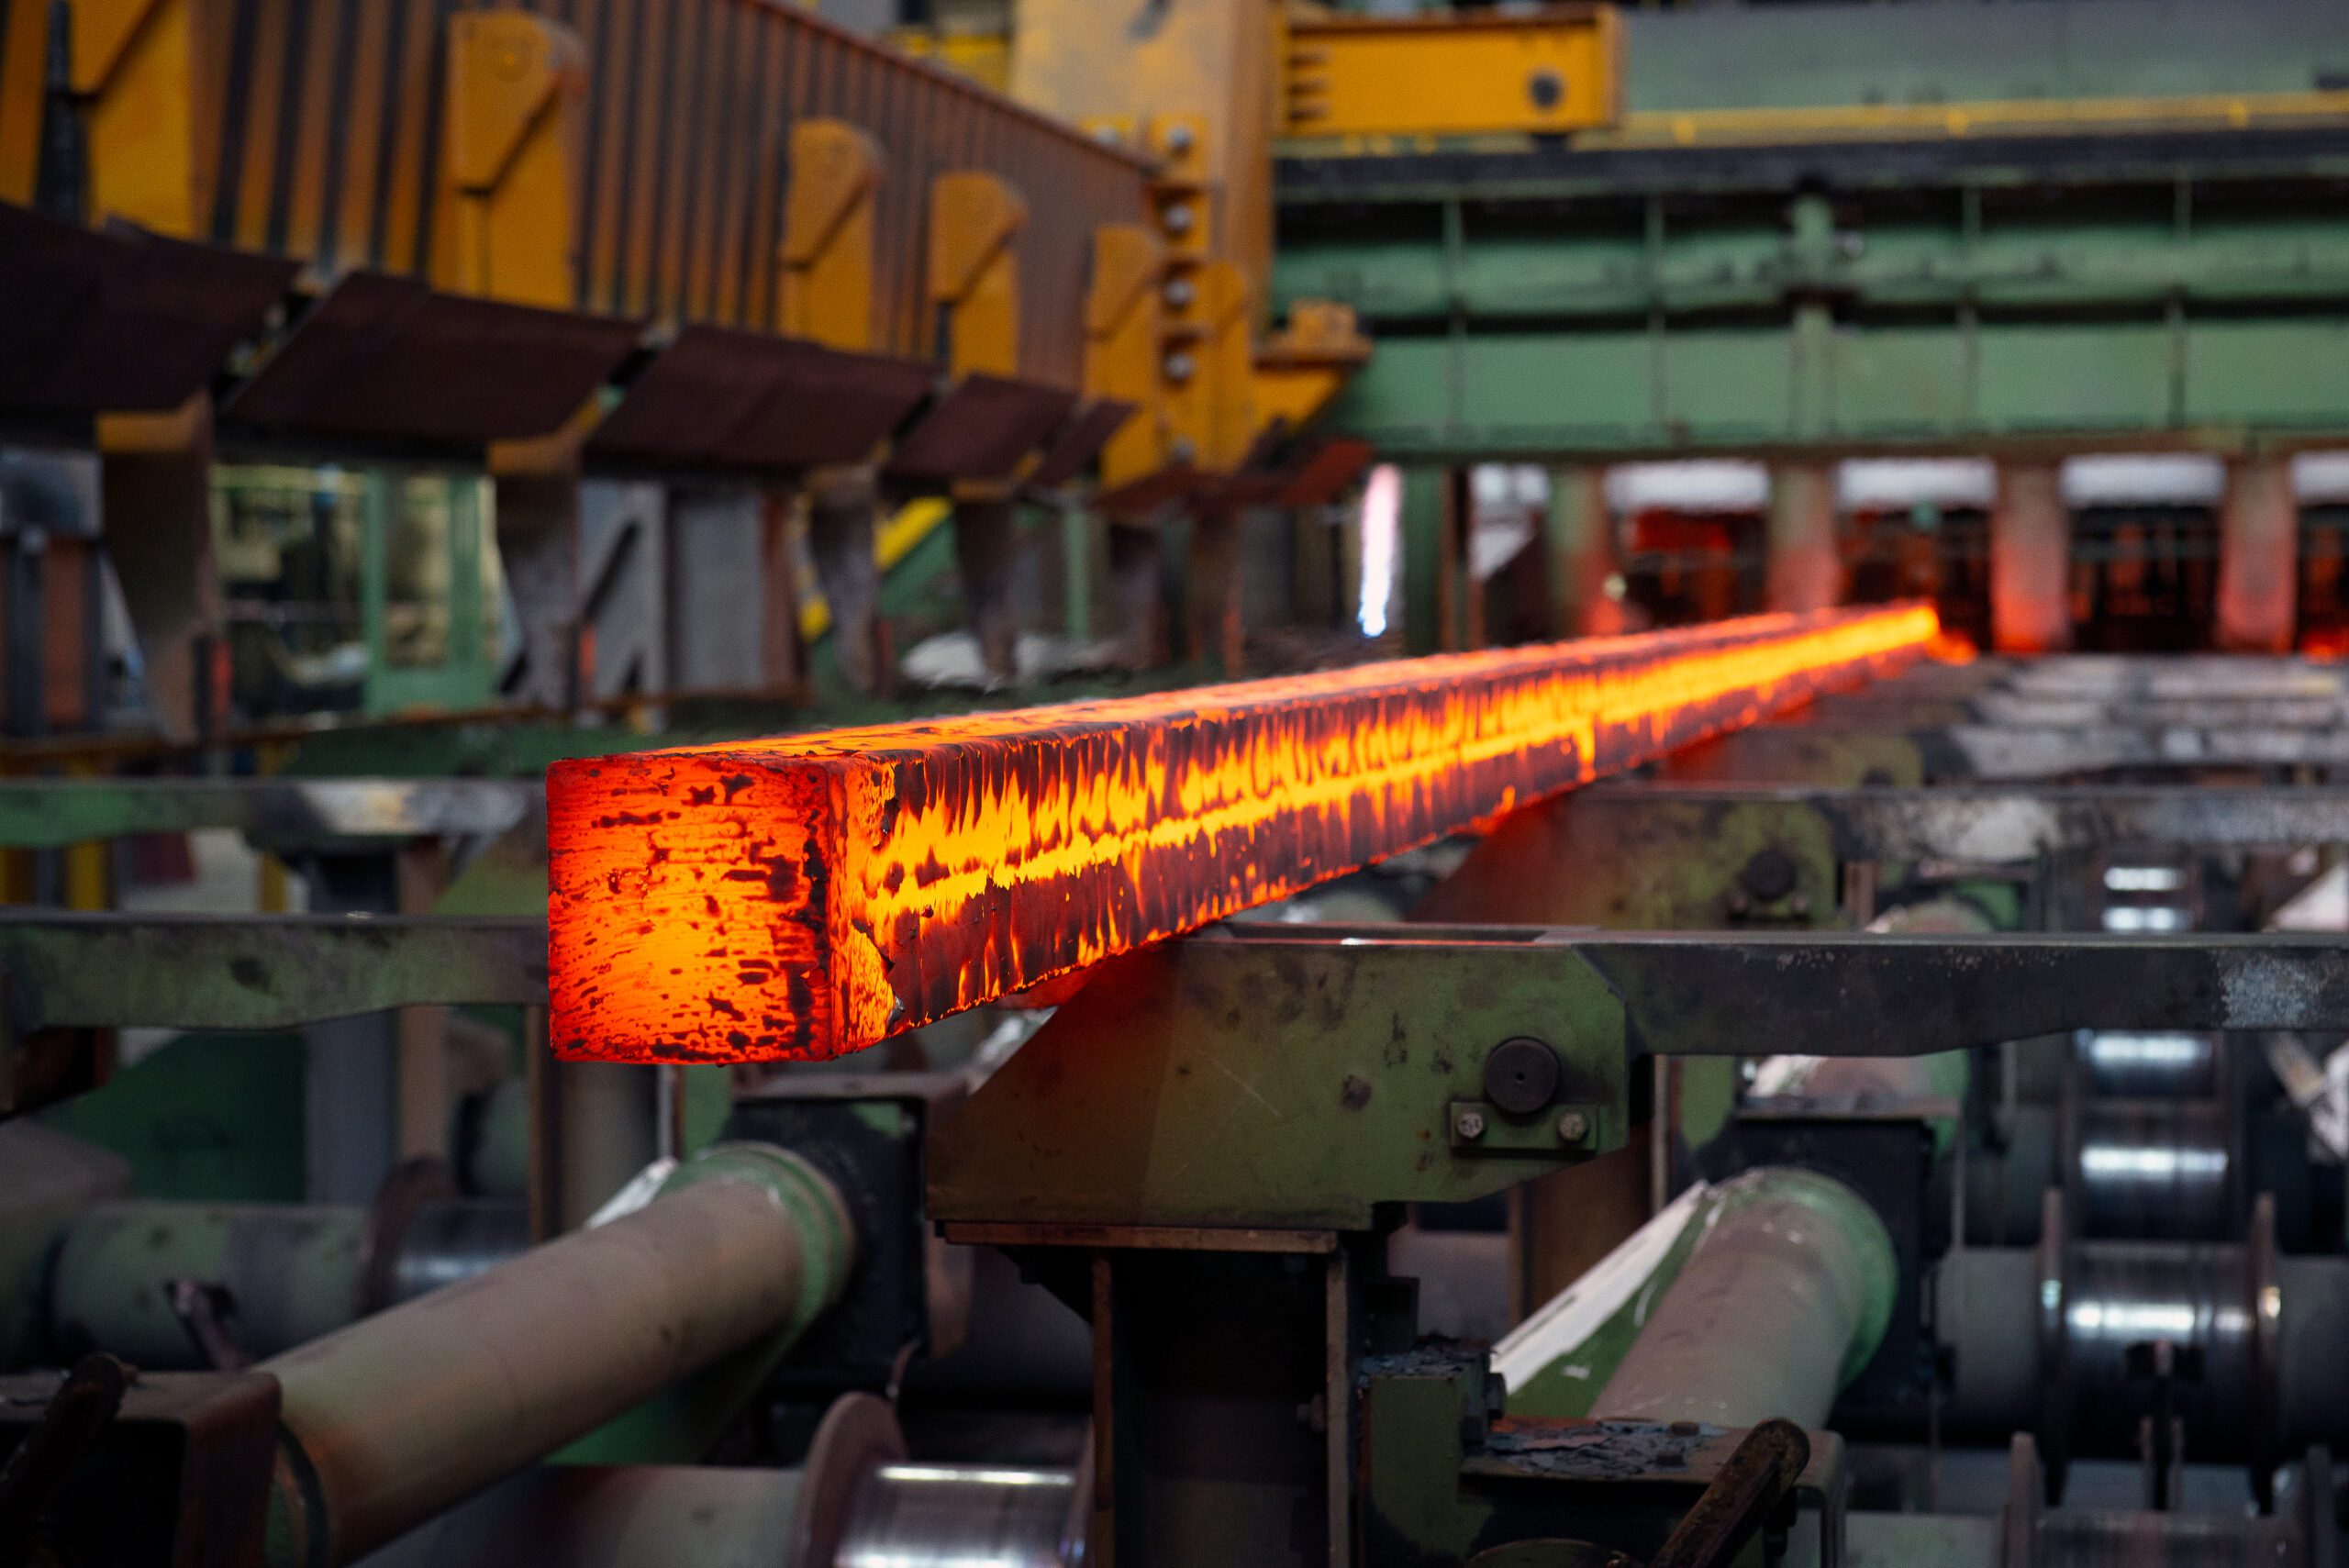 Steel Market in a U.S.: Manufacturing company Steel,Production,In,Electric,Furnaces.,Sparks,Of,Molten,Steel.,Electric